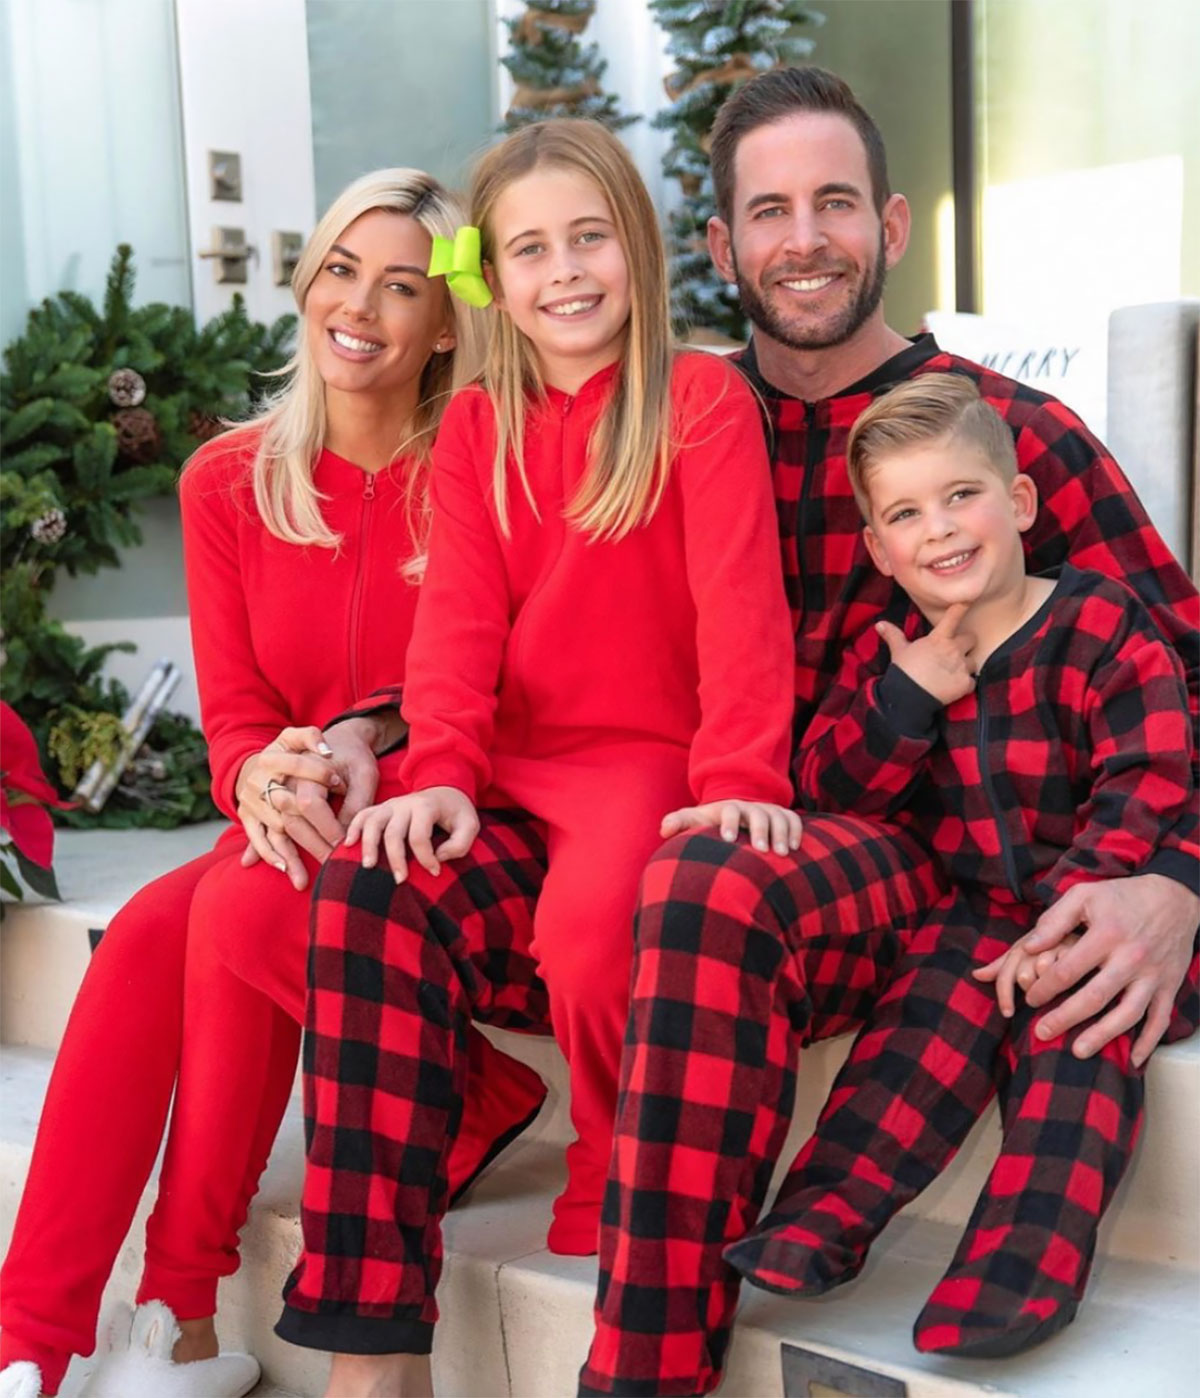 Celeb Parents Wear Matching Pajamas With Their Kids: Pics | Us Weekly